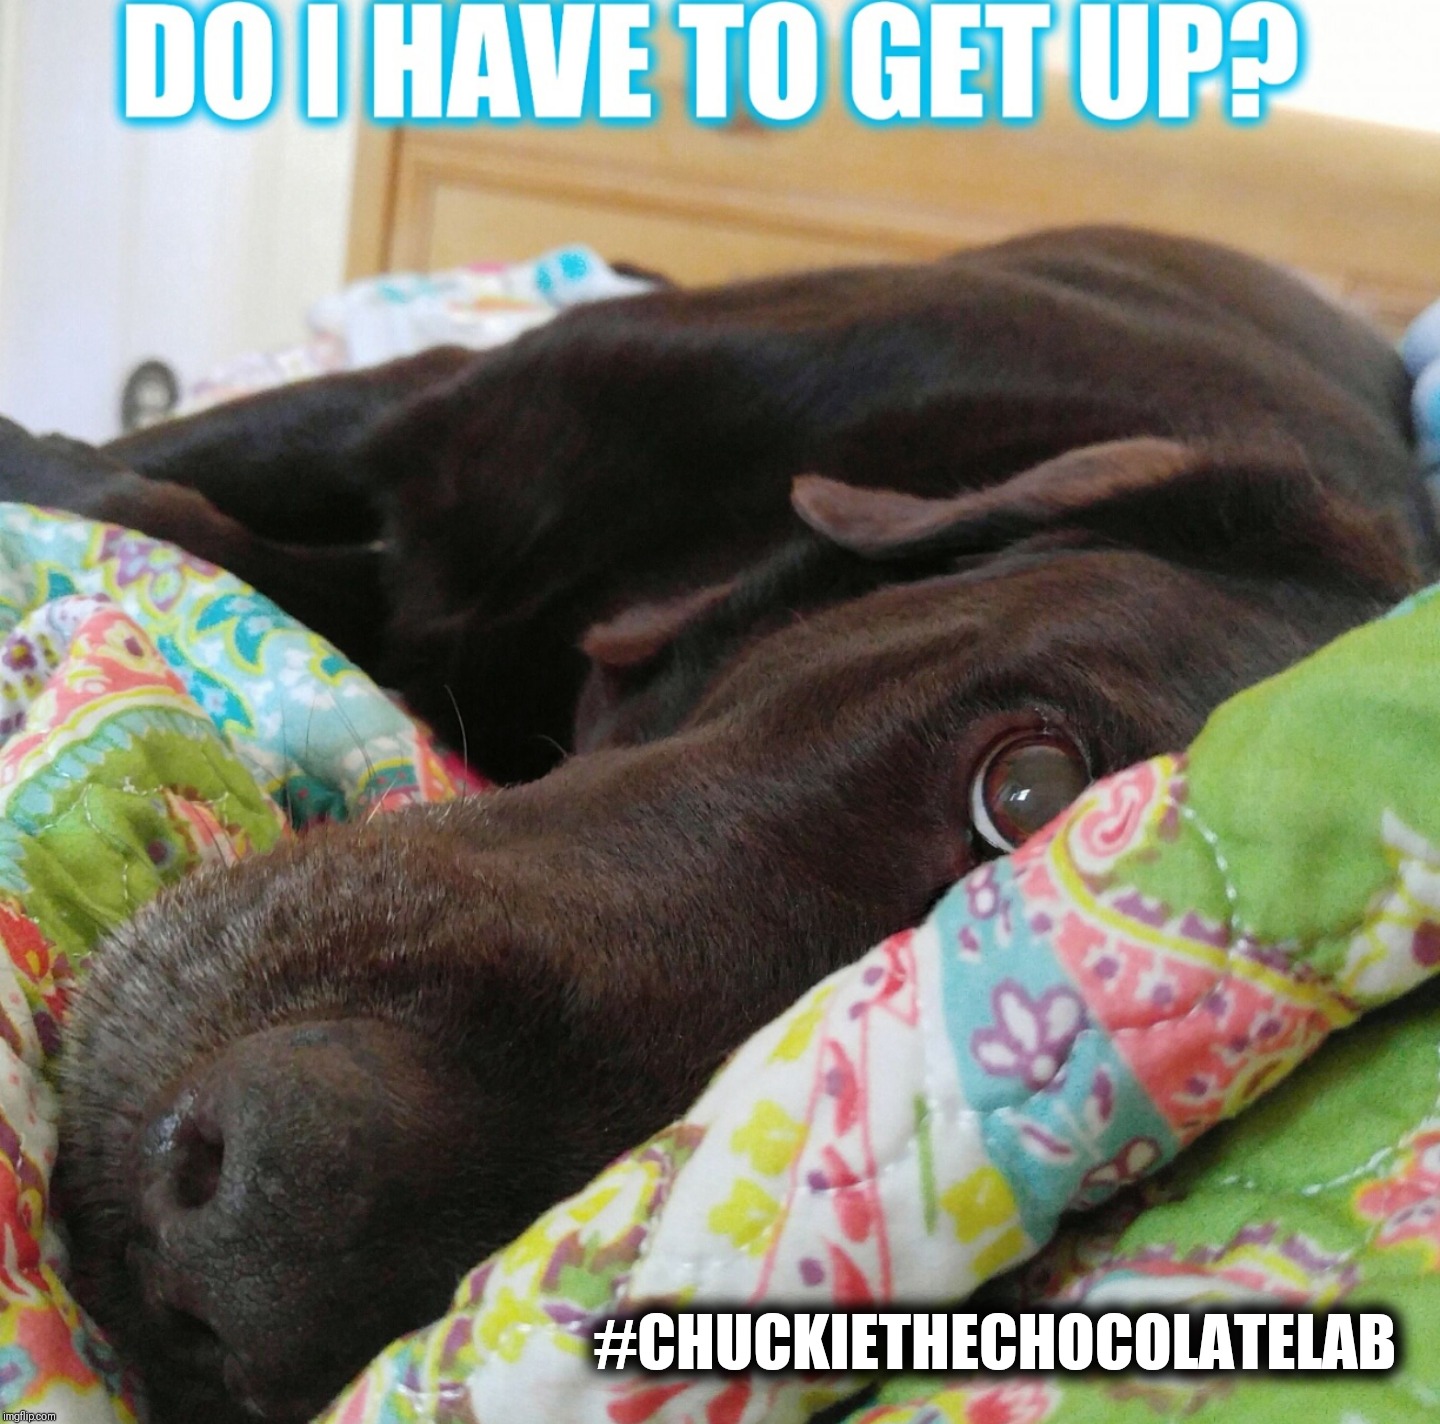 Do I have to get up? | #CHUCKIETHECHOCOLATELAB | image tagged in chuckie the chocolate lab,tired,dogs,funny,monday mornings,memes | made w/ Imgflip meme maker